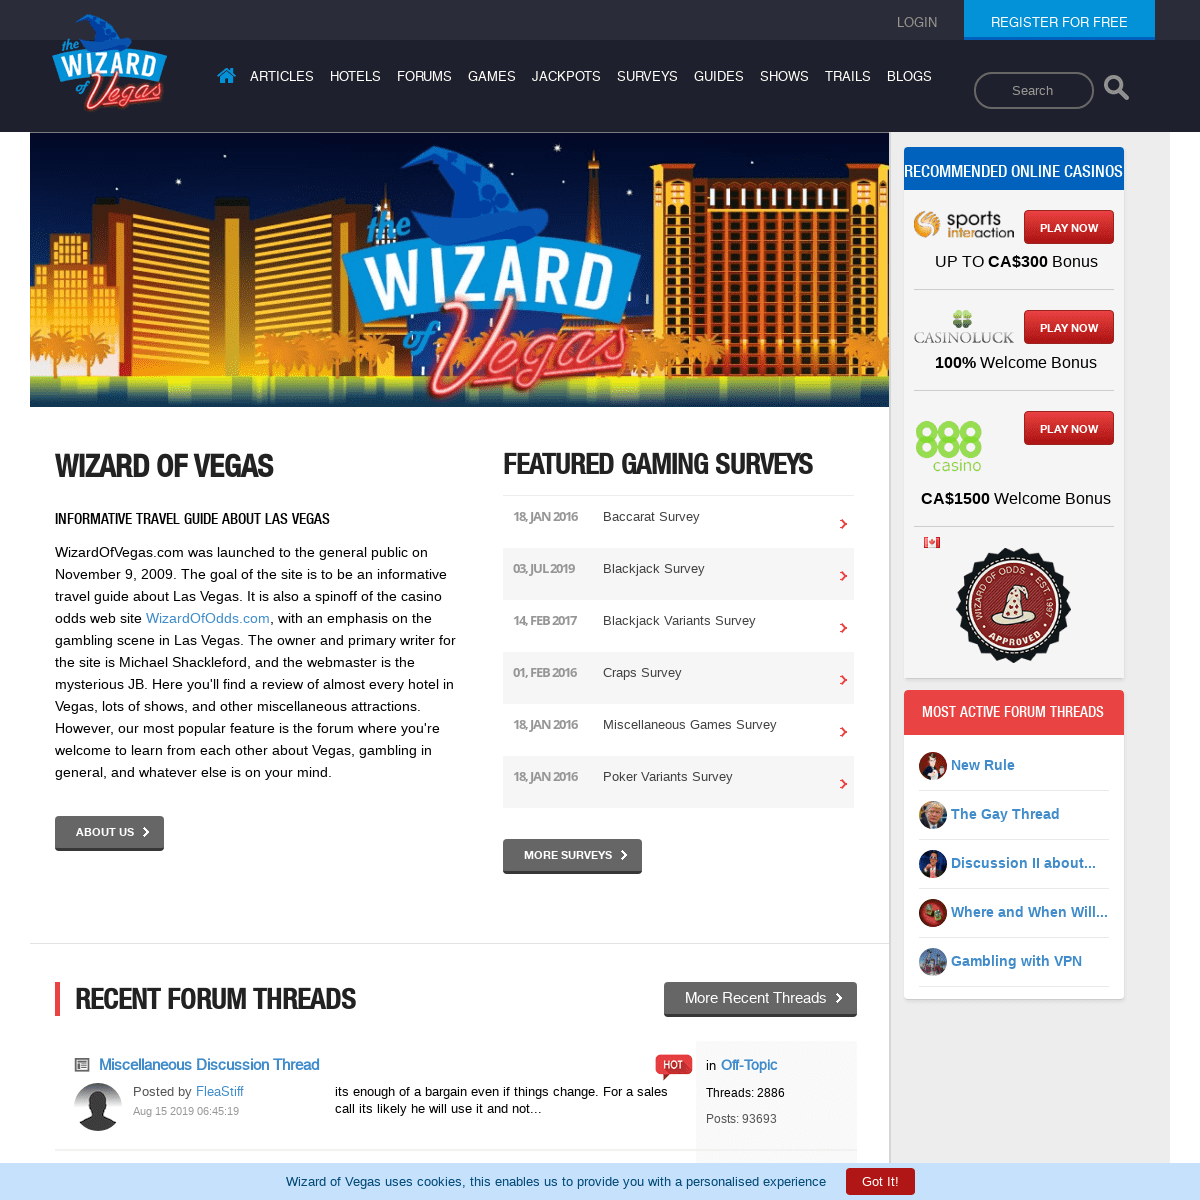 Wizard of Vegas - Las Vegas casino and show reviews and forums